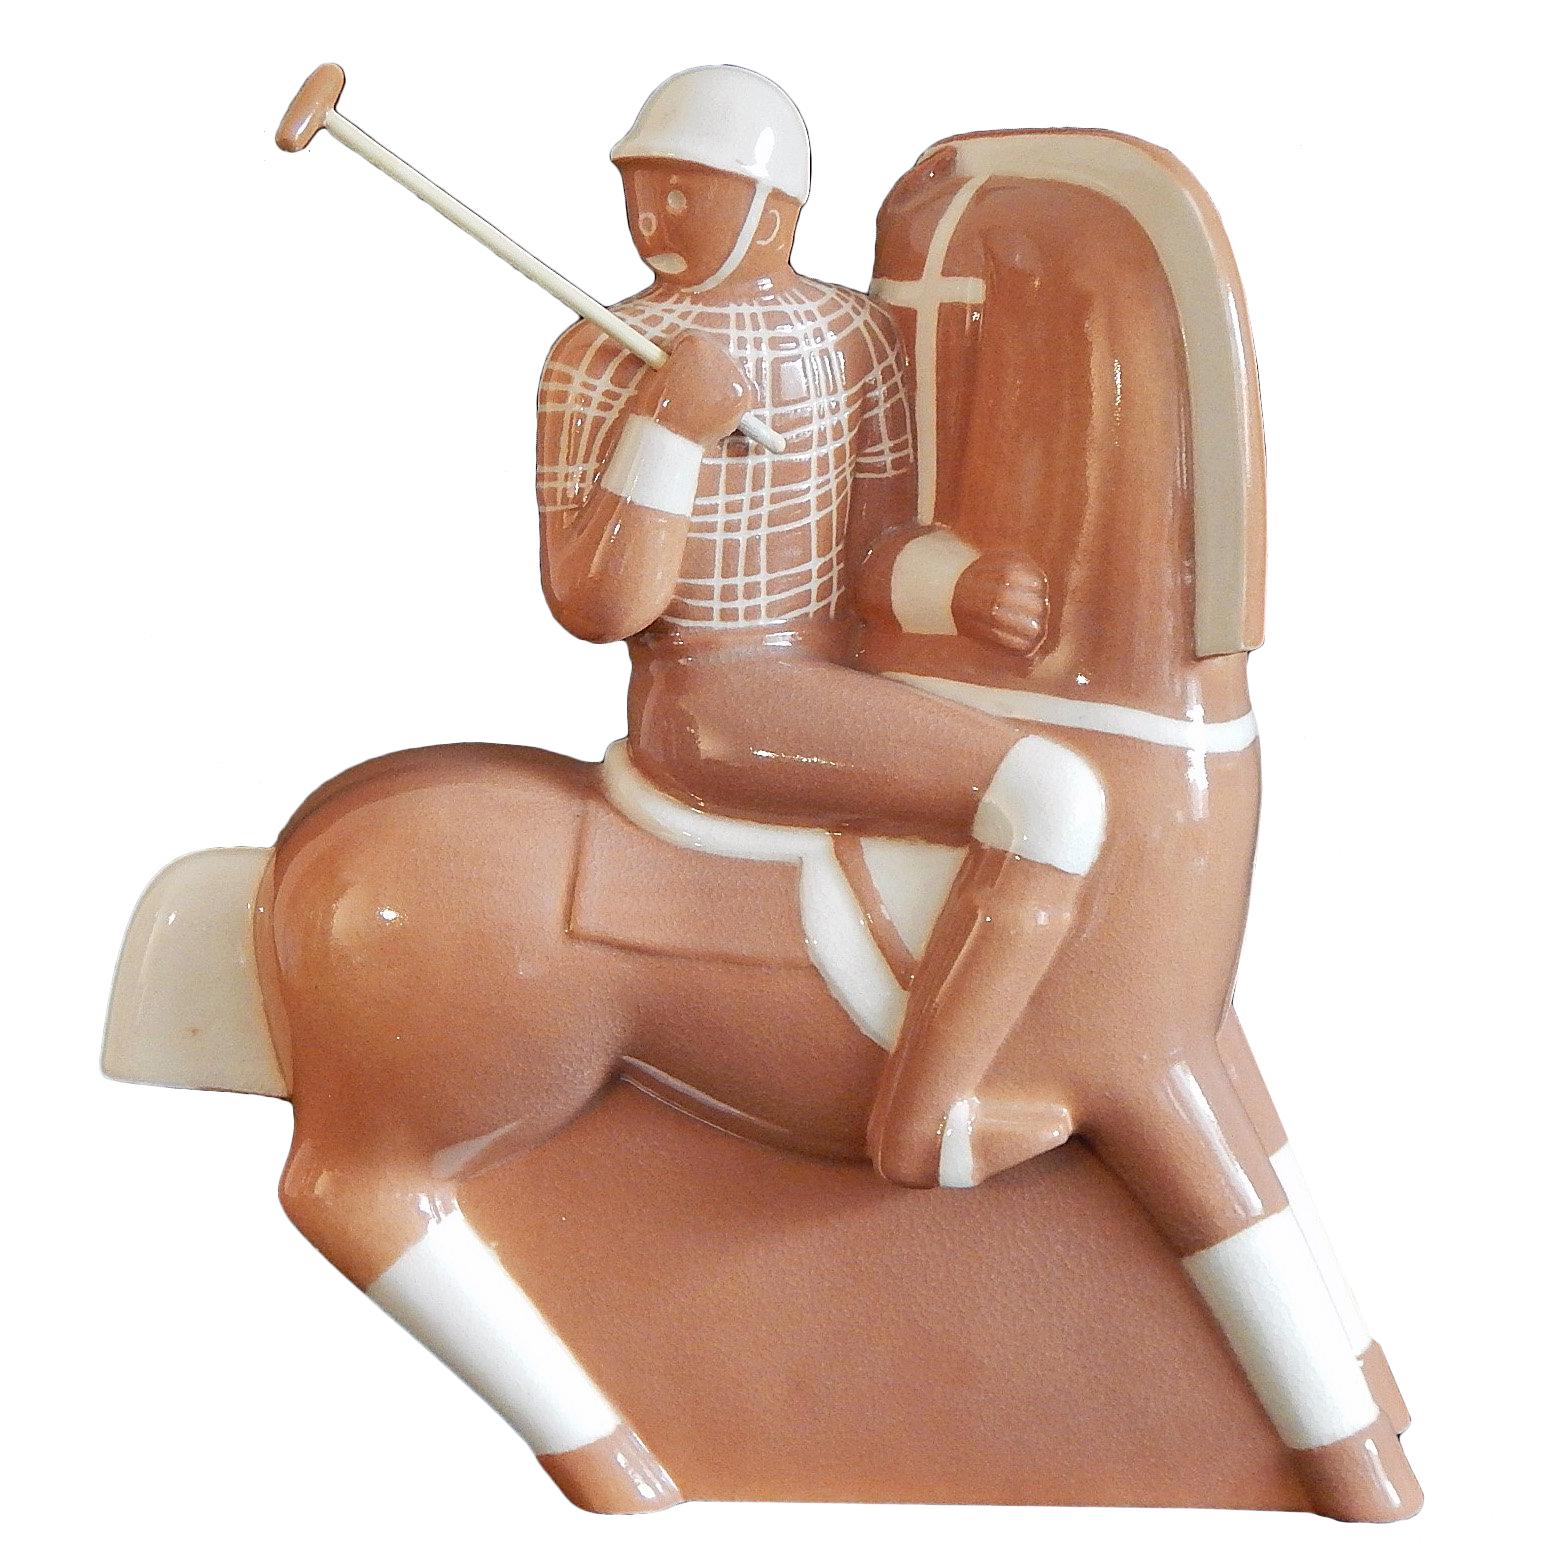 "Polo Player, " Classic and Rare Art Deco Sculpture in Caramel Hue by Gregory For Sale